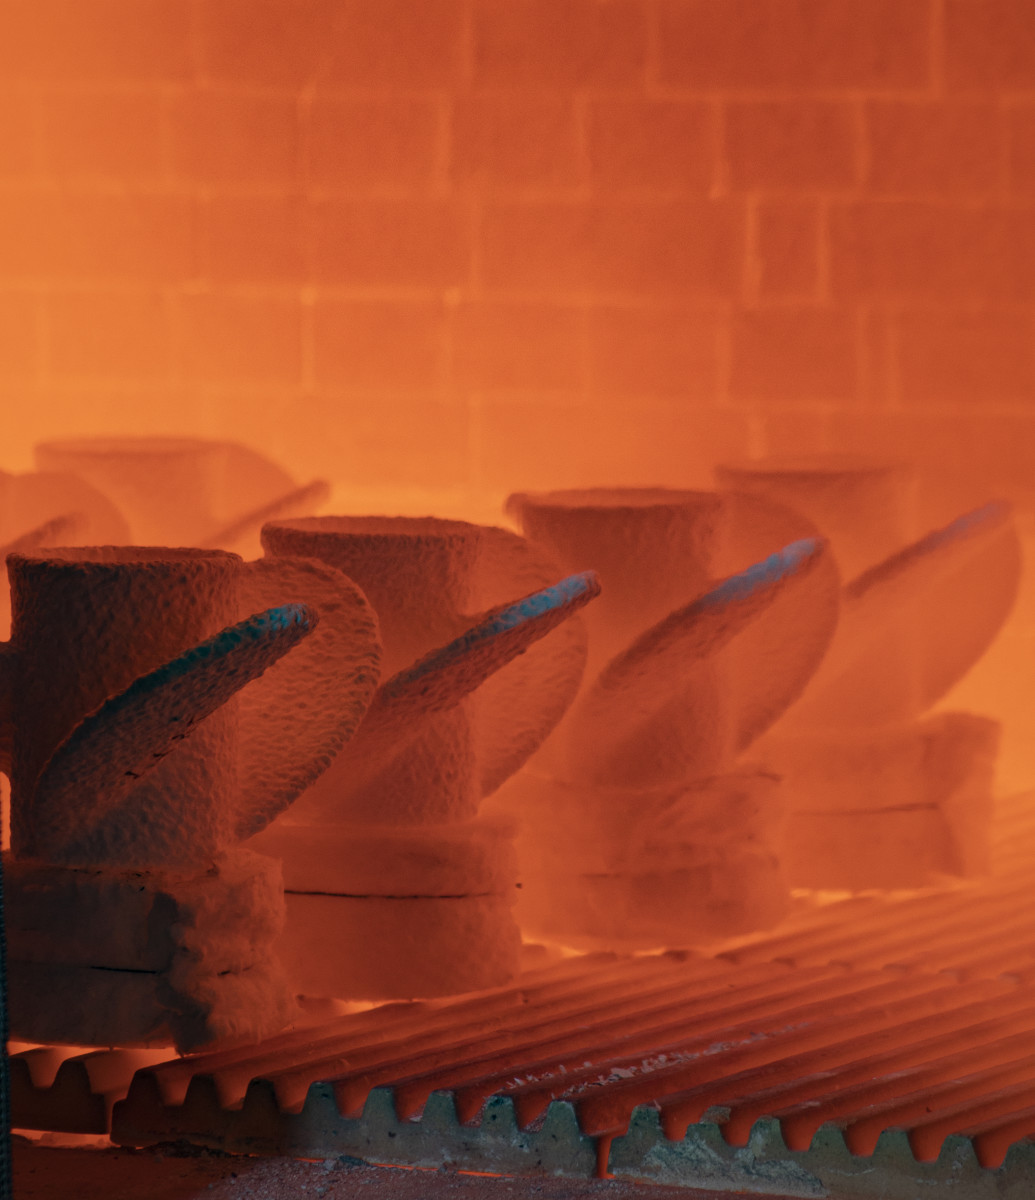 Ceramic propeller molds are heated to 1,800 degrees prior to being filled with molten 15-5 stainless-steel alloy.